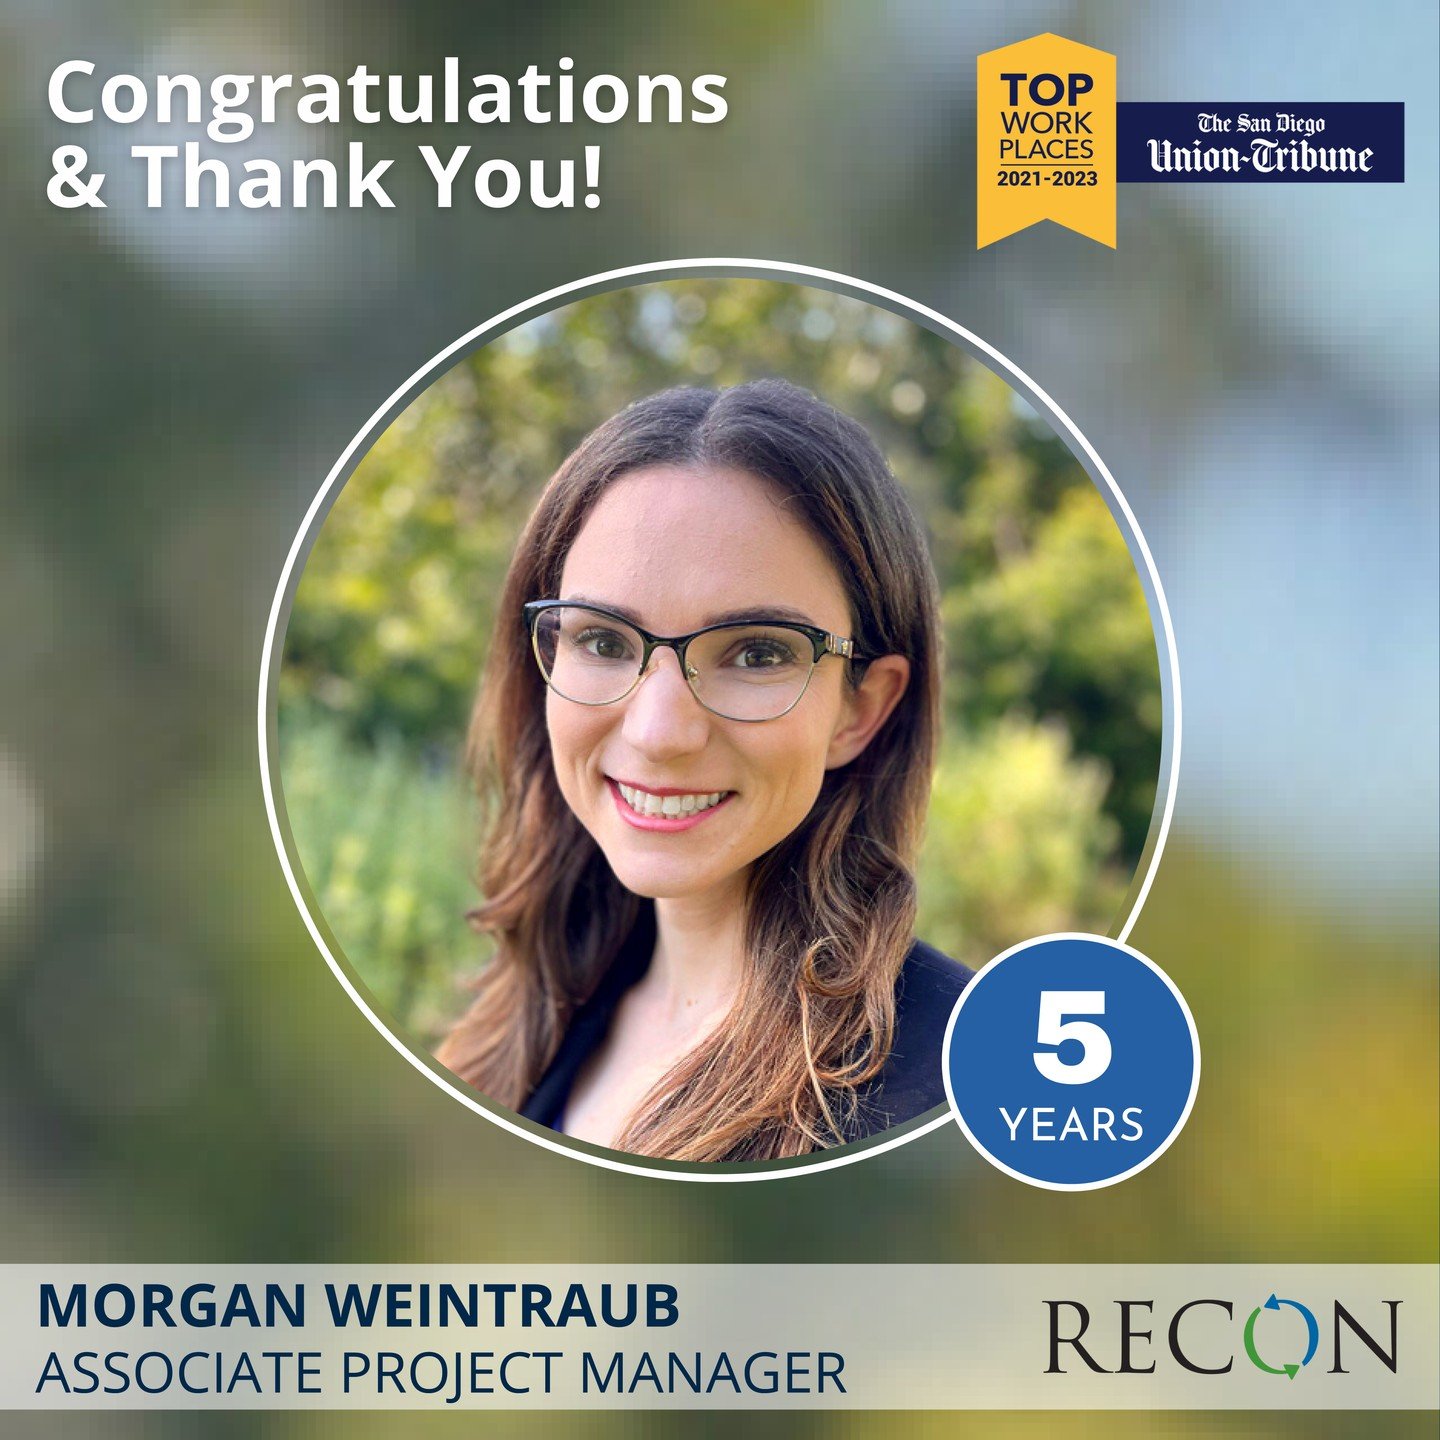 Congratulations on your 5th work anniversary with @reconenv! Morgan your hard work is on display every day, and we truly appreciate your dedication.